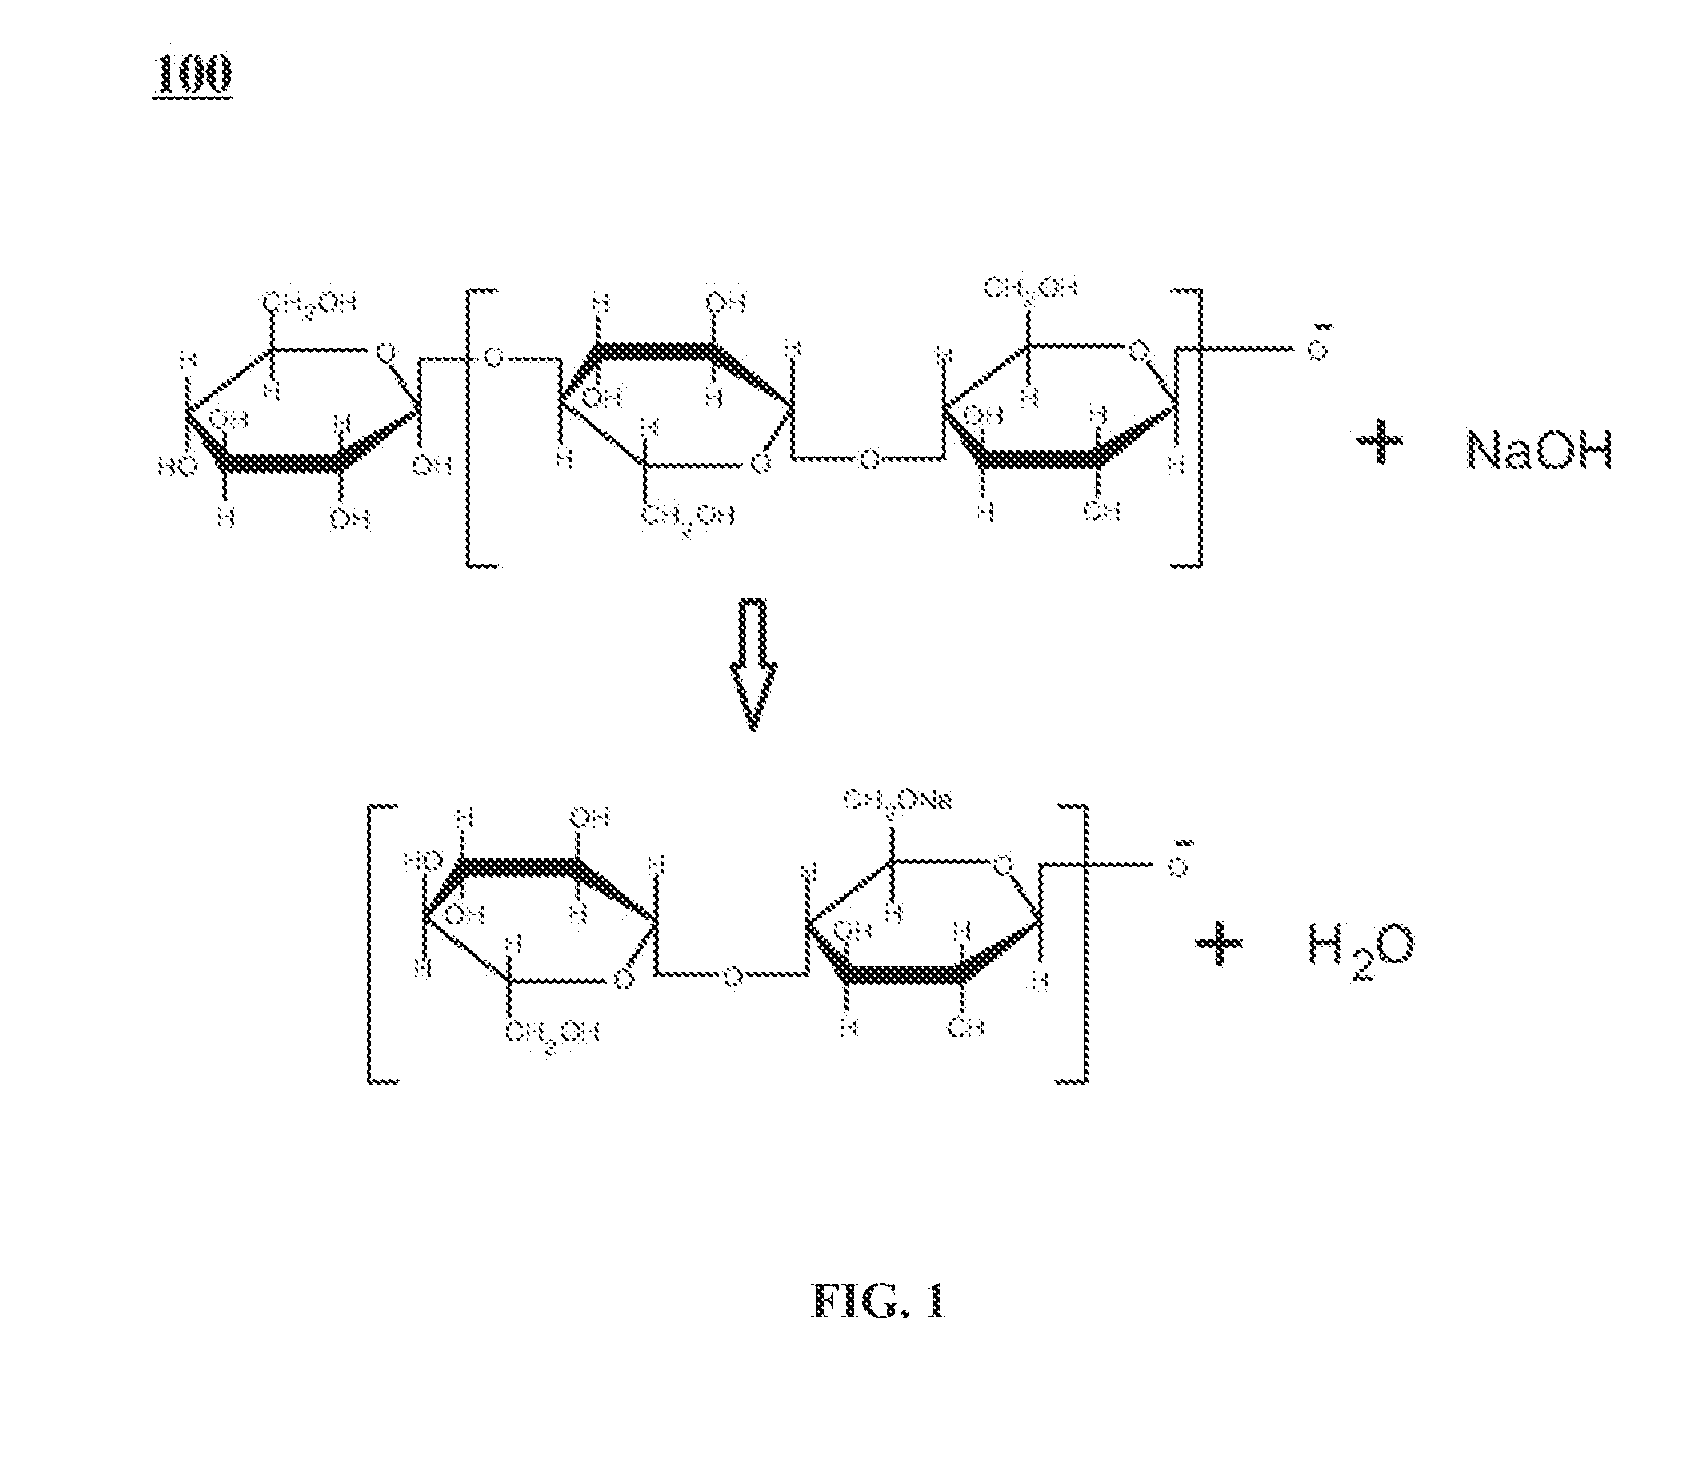 Hemostatic Devices with Improved Properties and Methods of Making Same